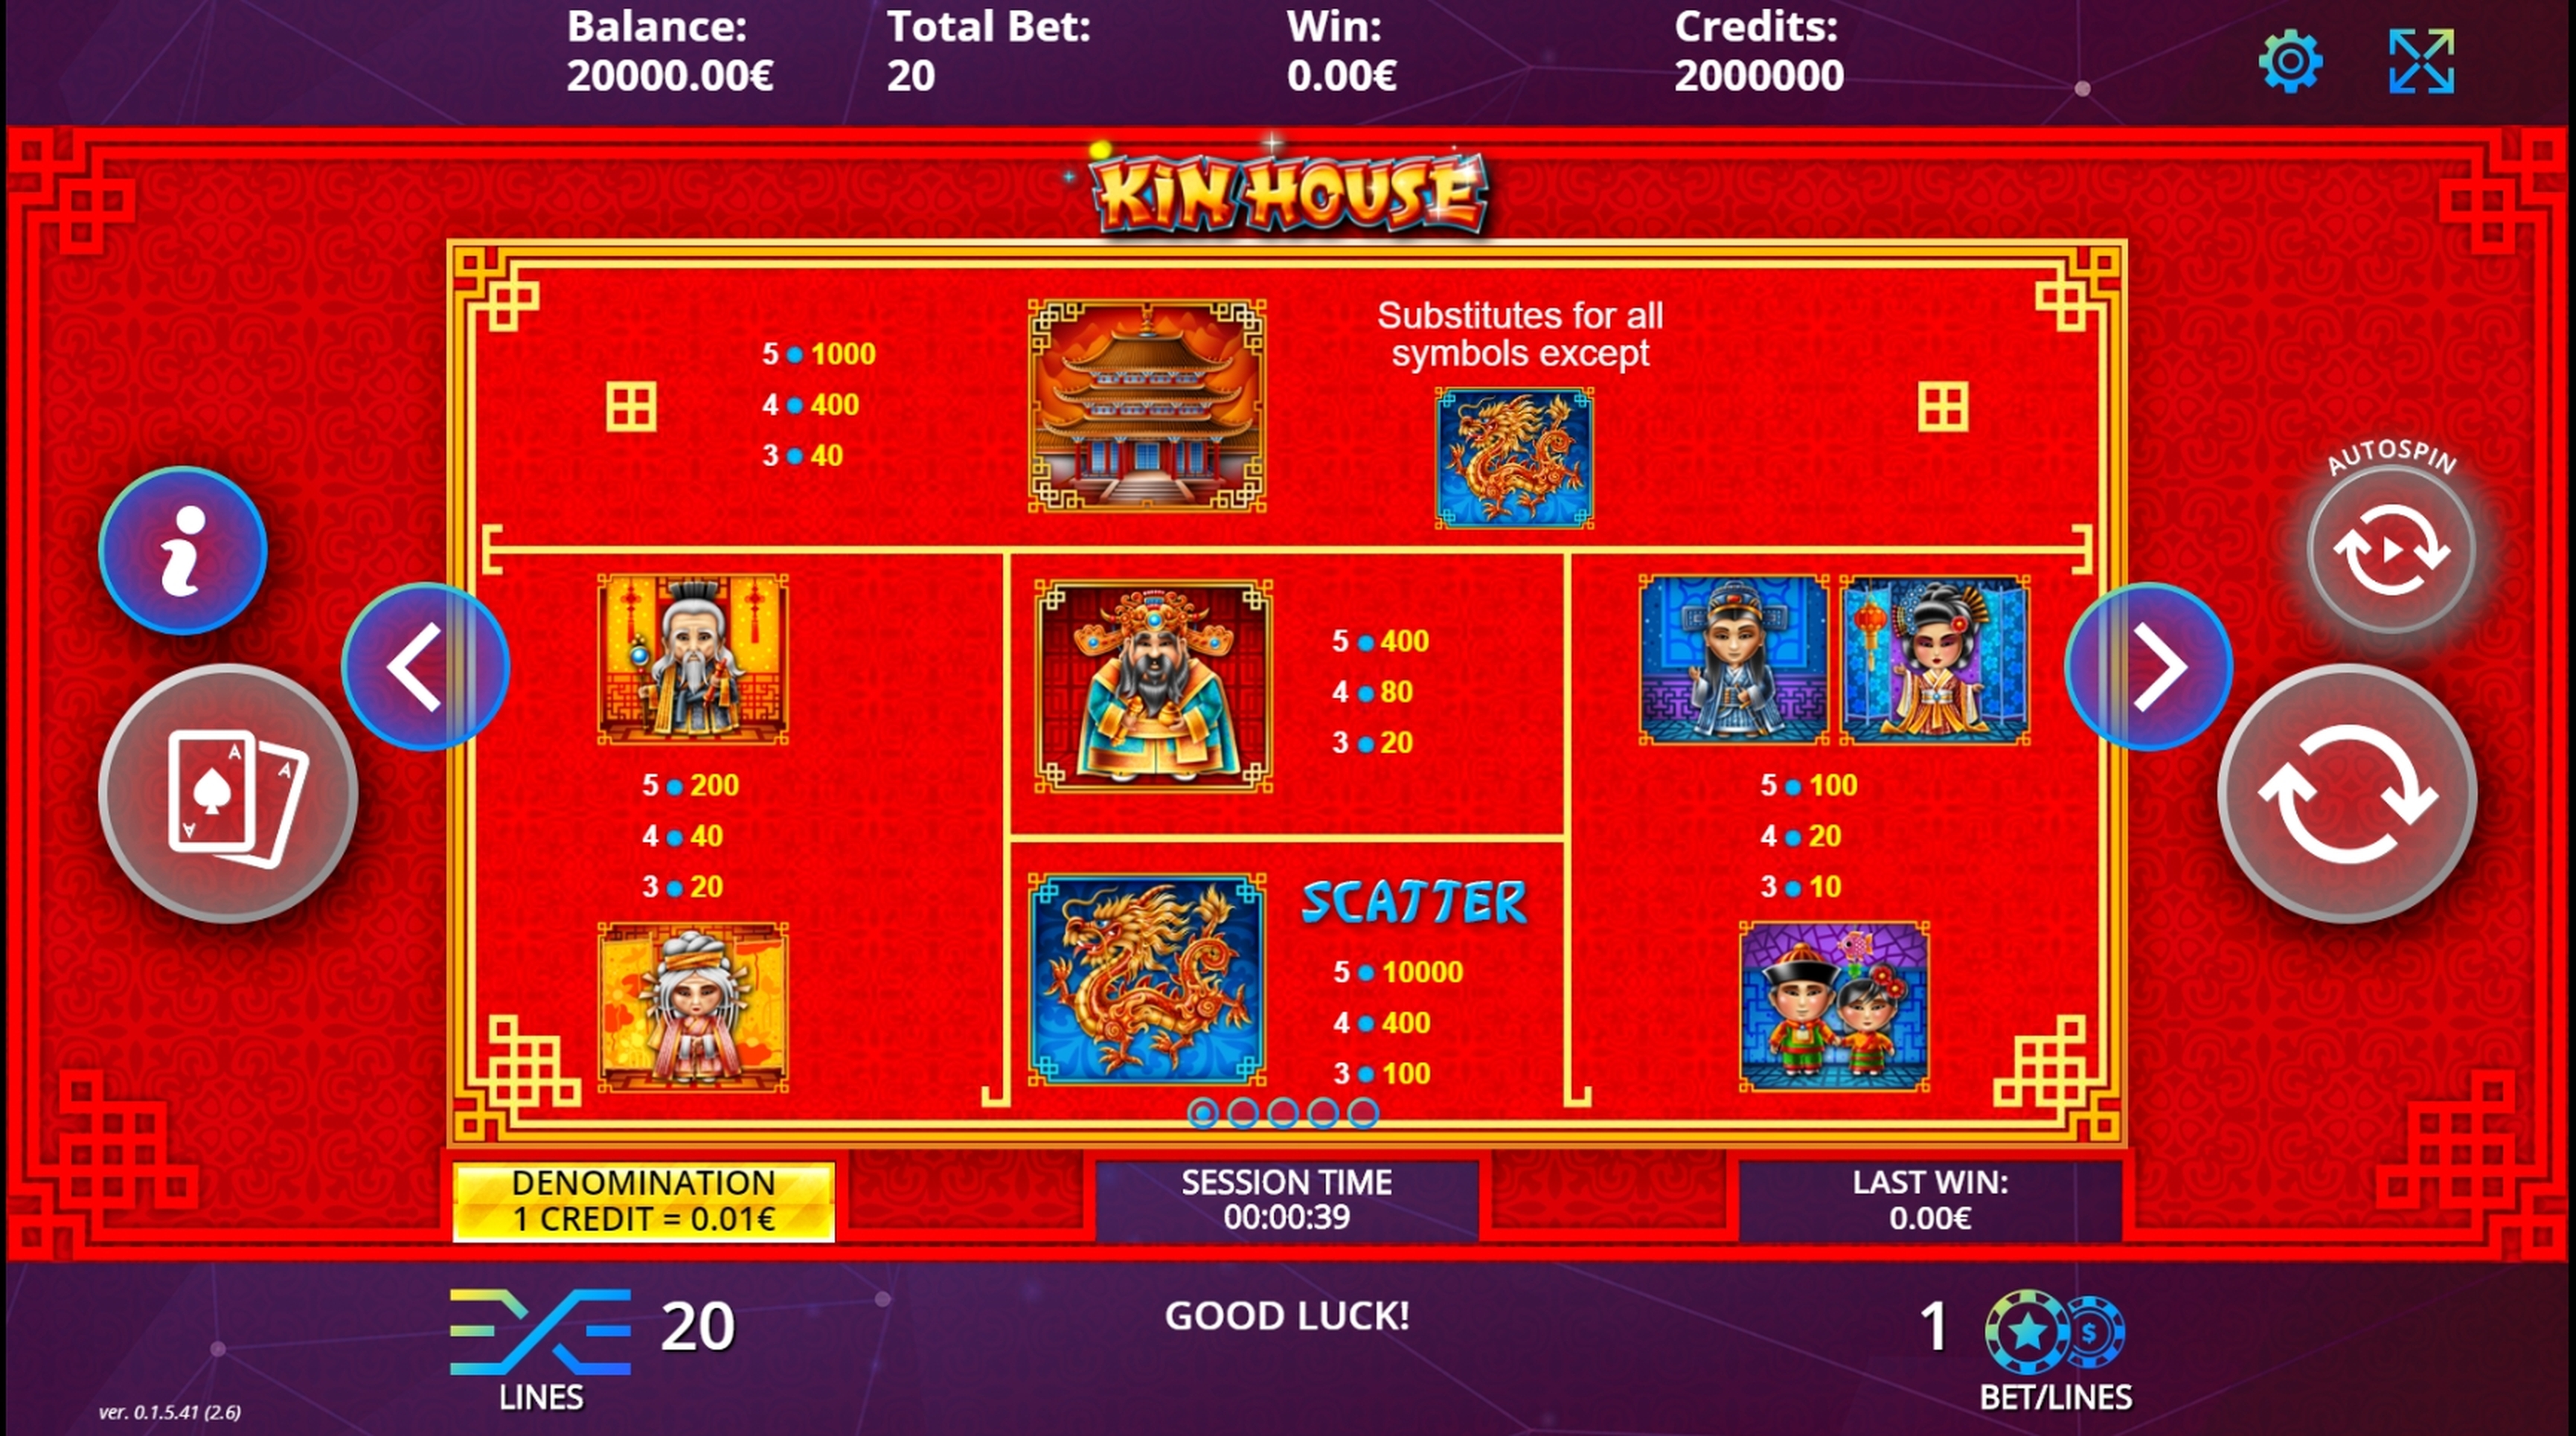 Info of Kin House Slot Game by DLV